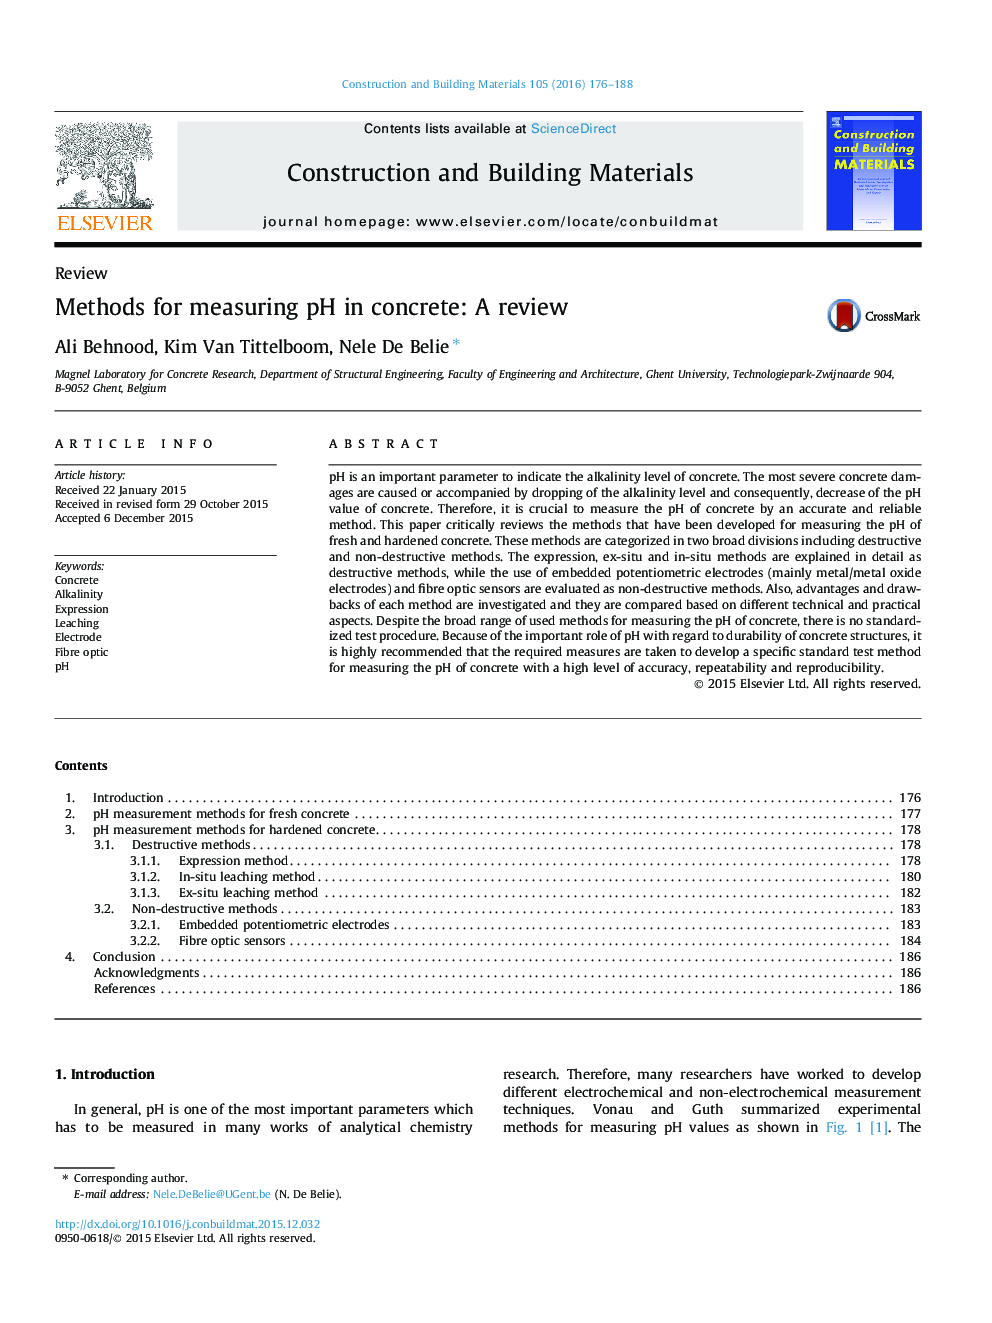 Methods for measuring pH in concrete: A review